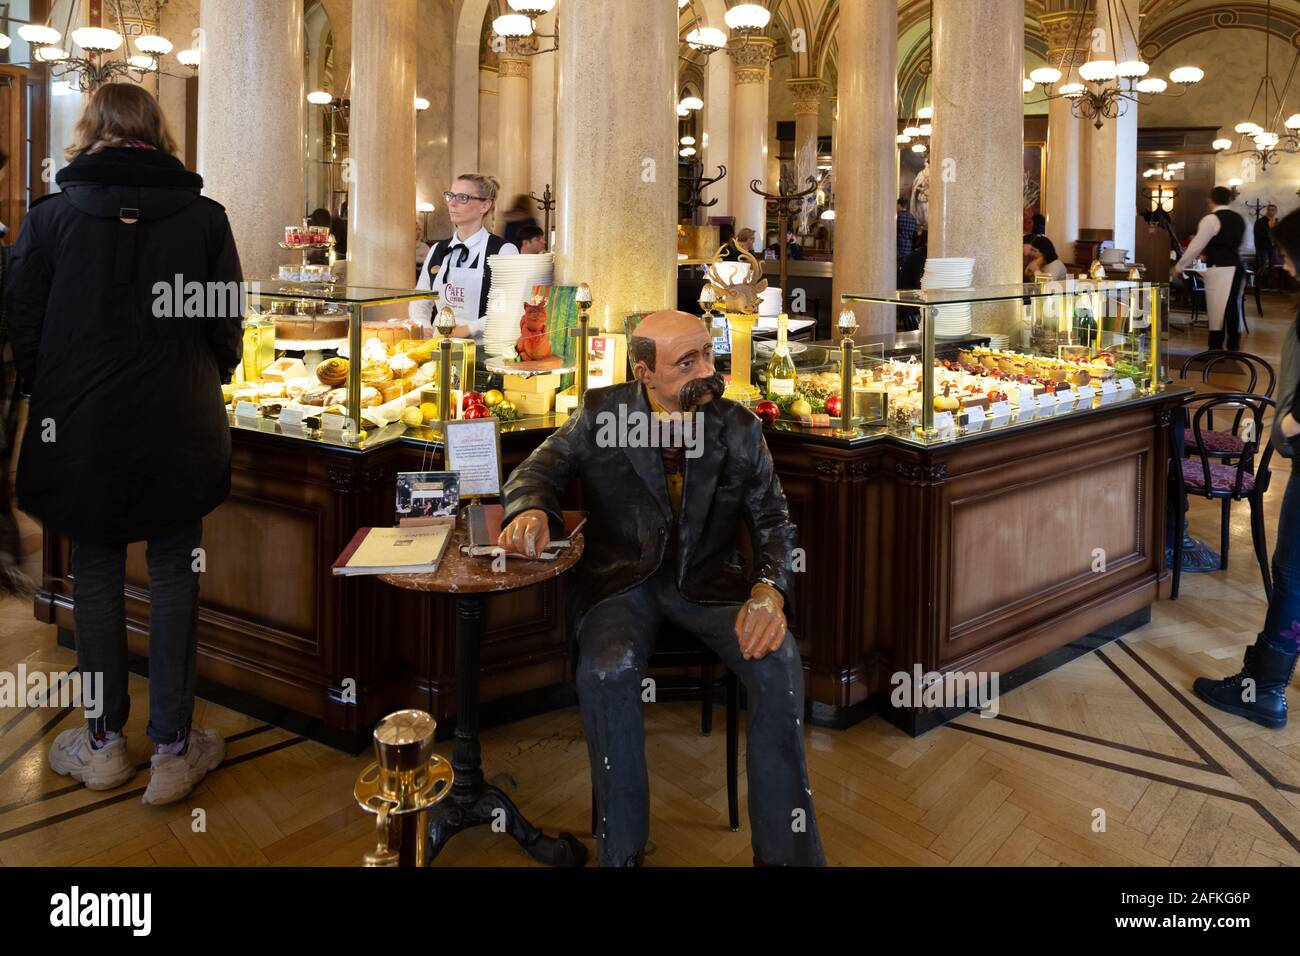 Cafe Central Vienna, view of the interior of the famous Vienna coffee house and patisserie, Vienna Austria Europe Stock Photo